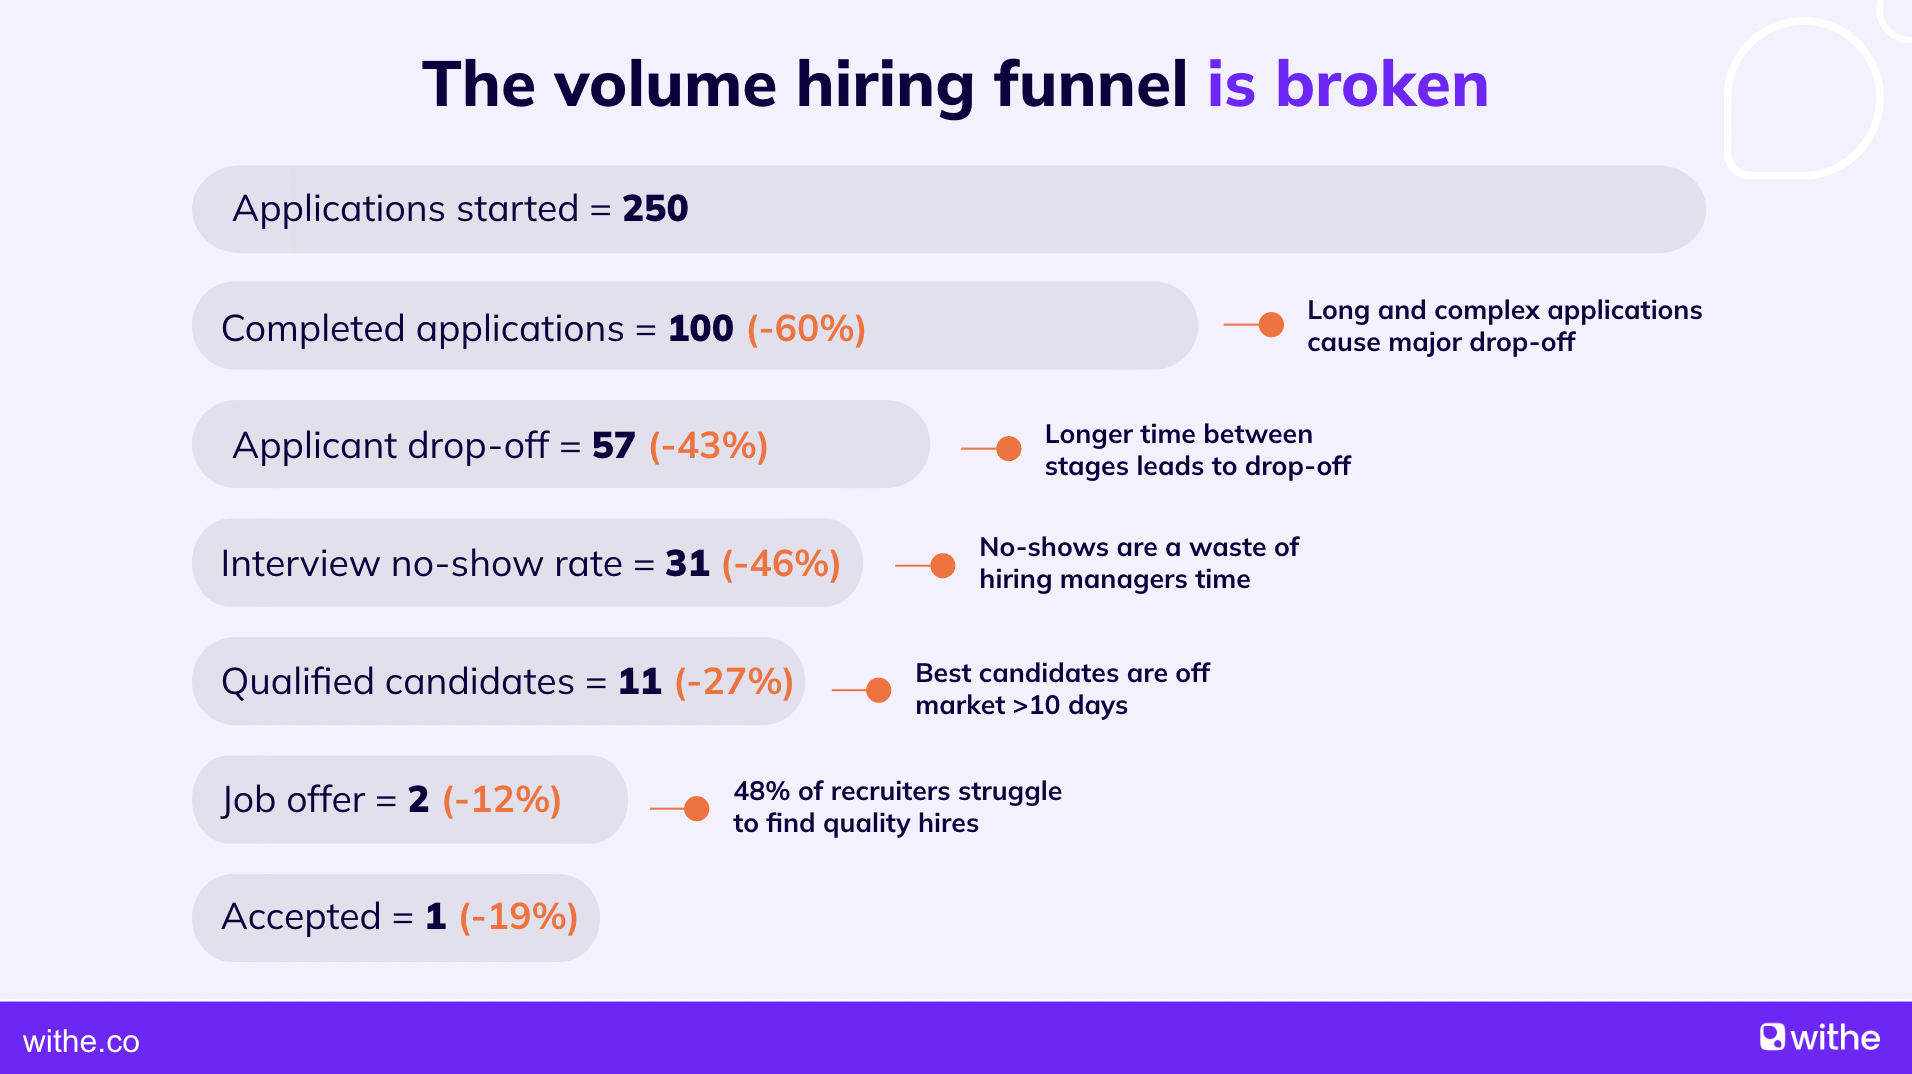 High-volume hiring challenges in the volume hiring funnel